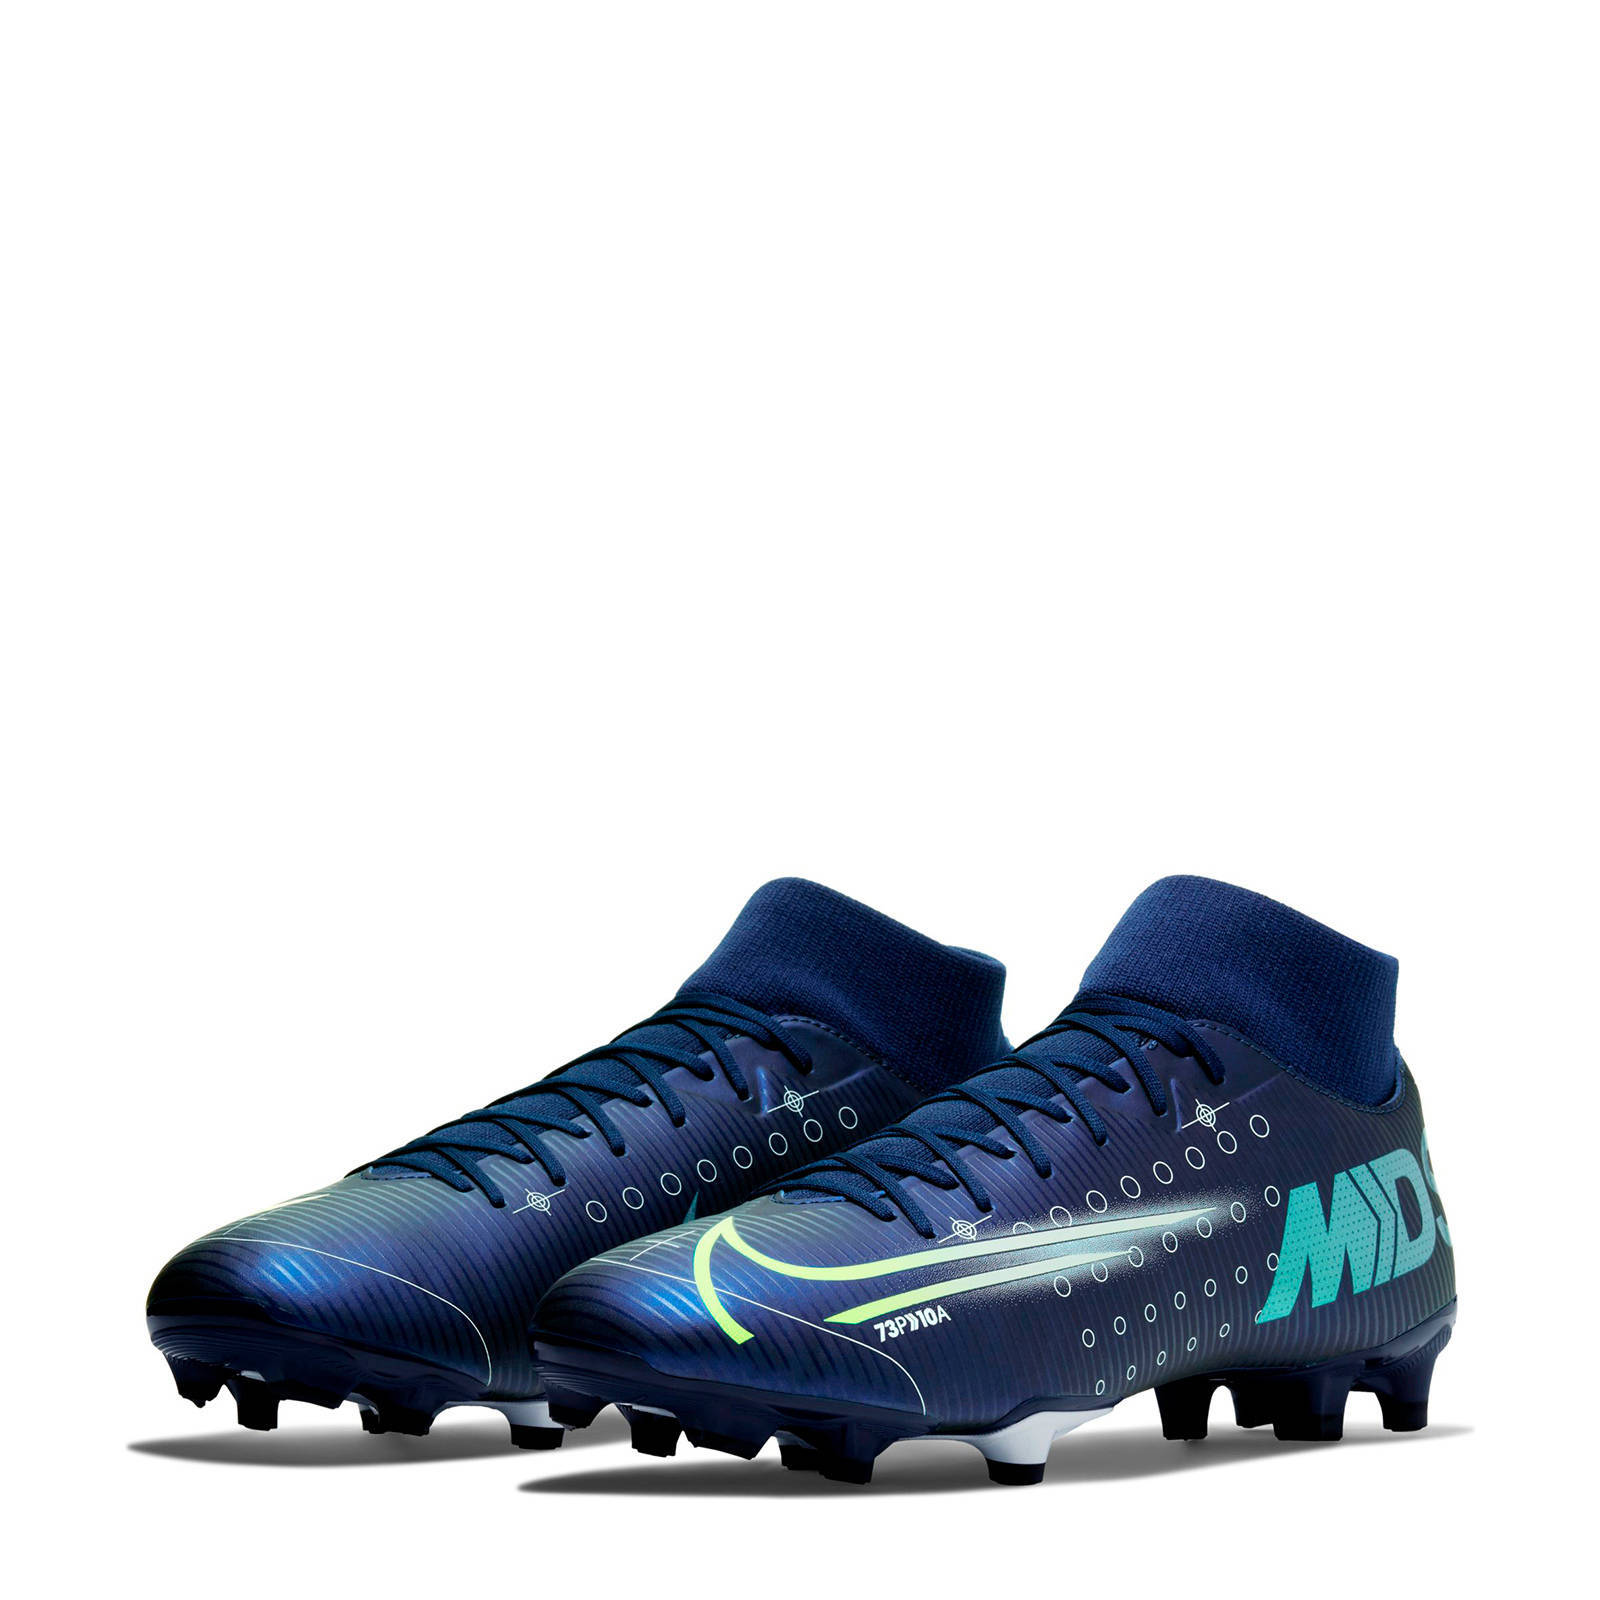 Football Boots Nike Mercurial Superfly VII Academy SG PRO.